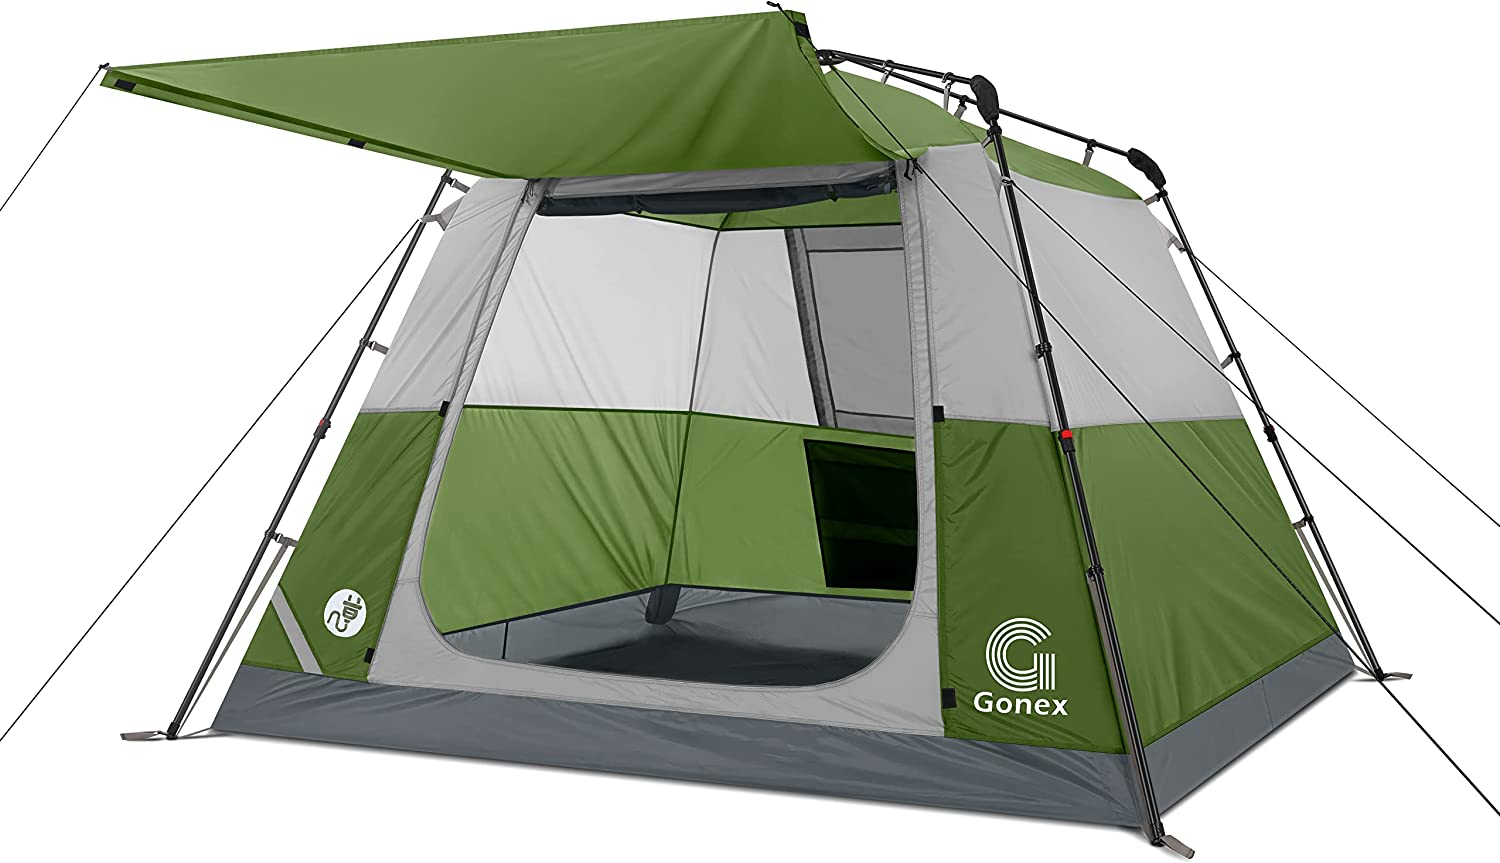 Gonex 4 Person Tents for Camping, Instant Tent with Porch Automatic Glamping Tent Waterproof Windproof Easy Set Up in Few Minutes Ideal for Family Car Trip, Festival Gathering and Picnic